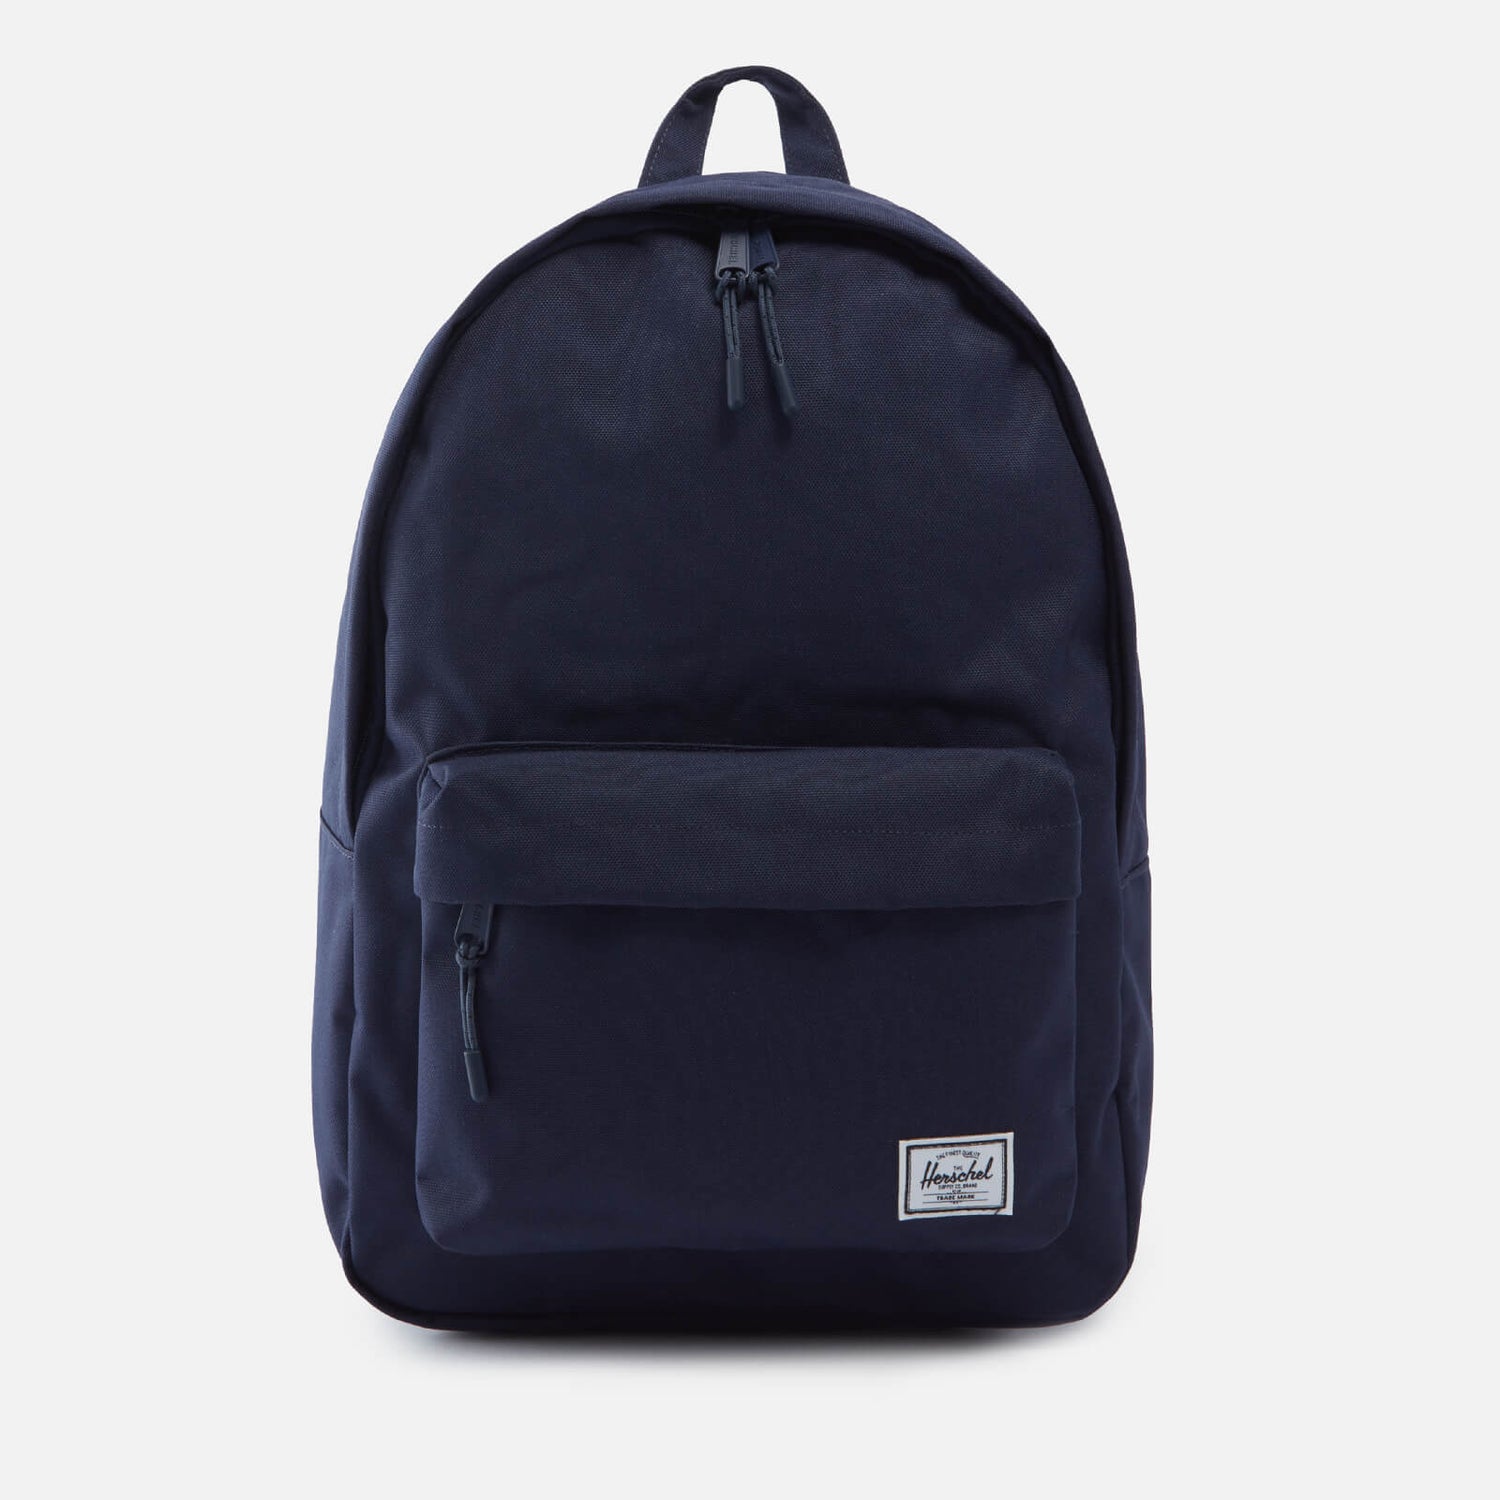 Herschel Supply Co. Classic Canvas Backpack